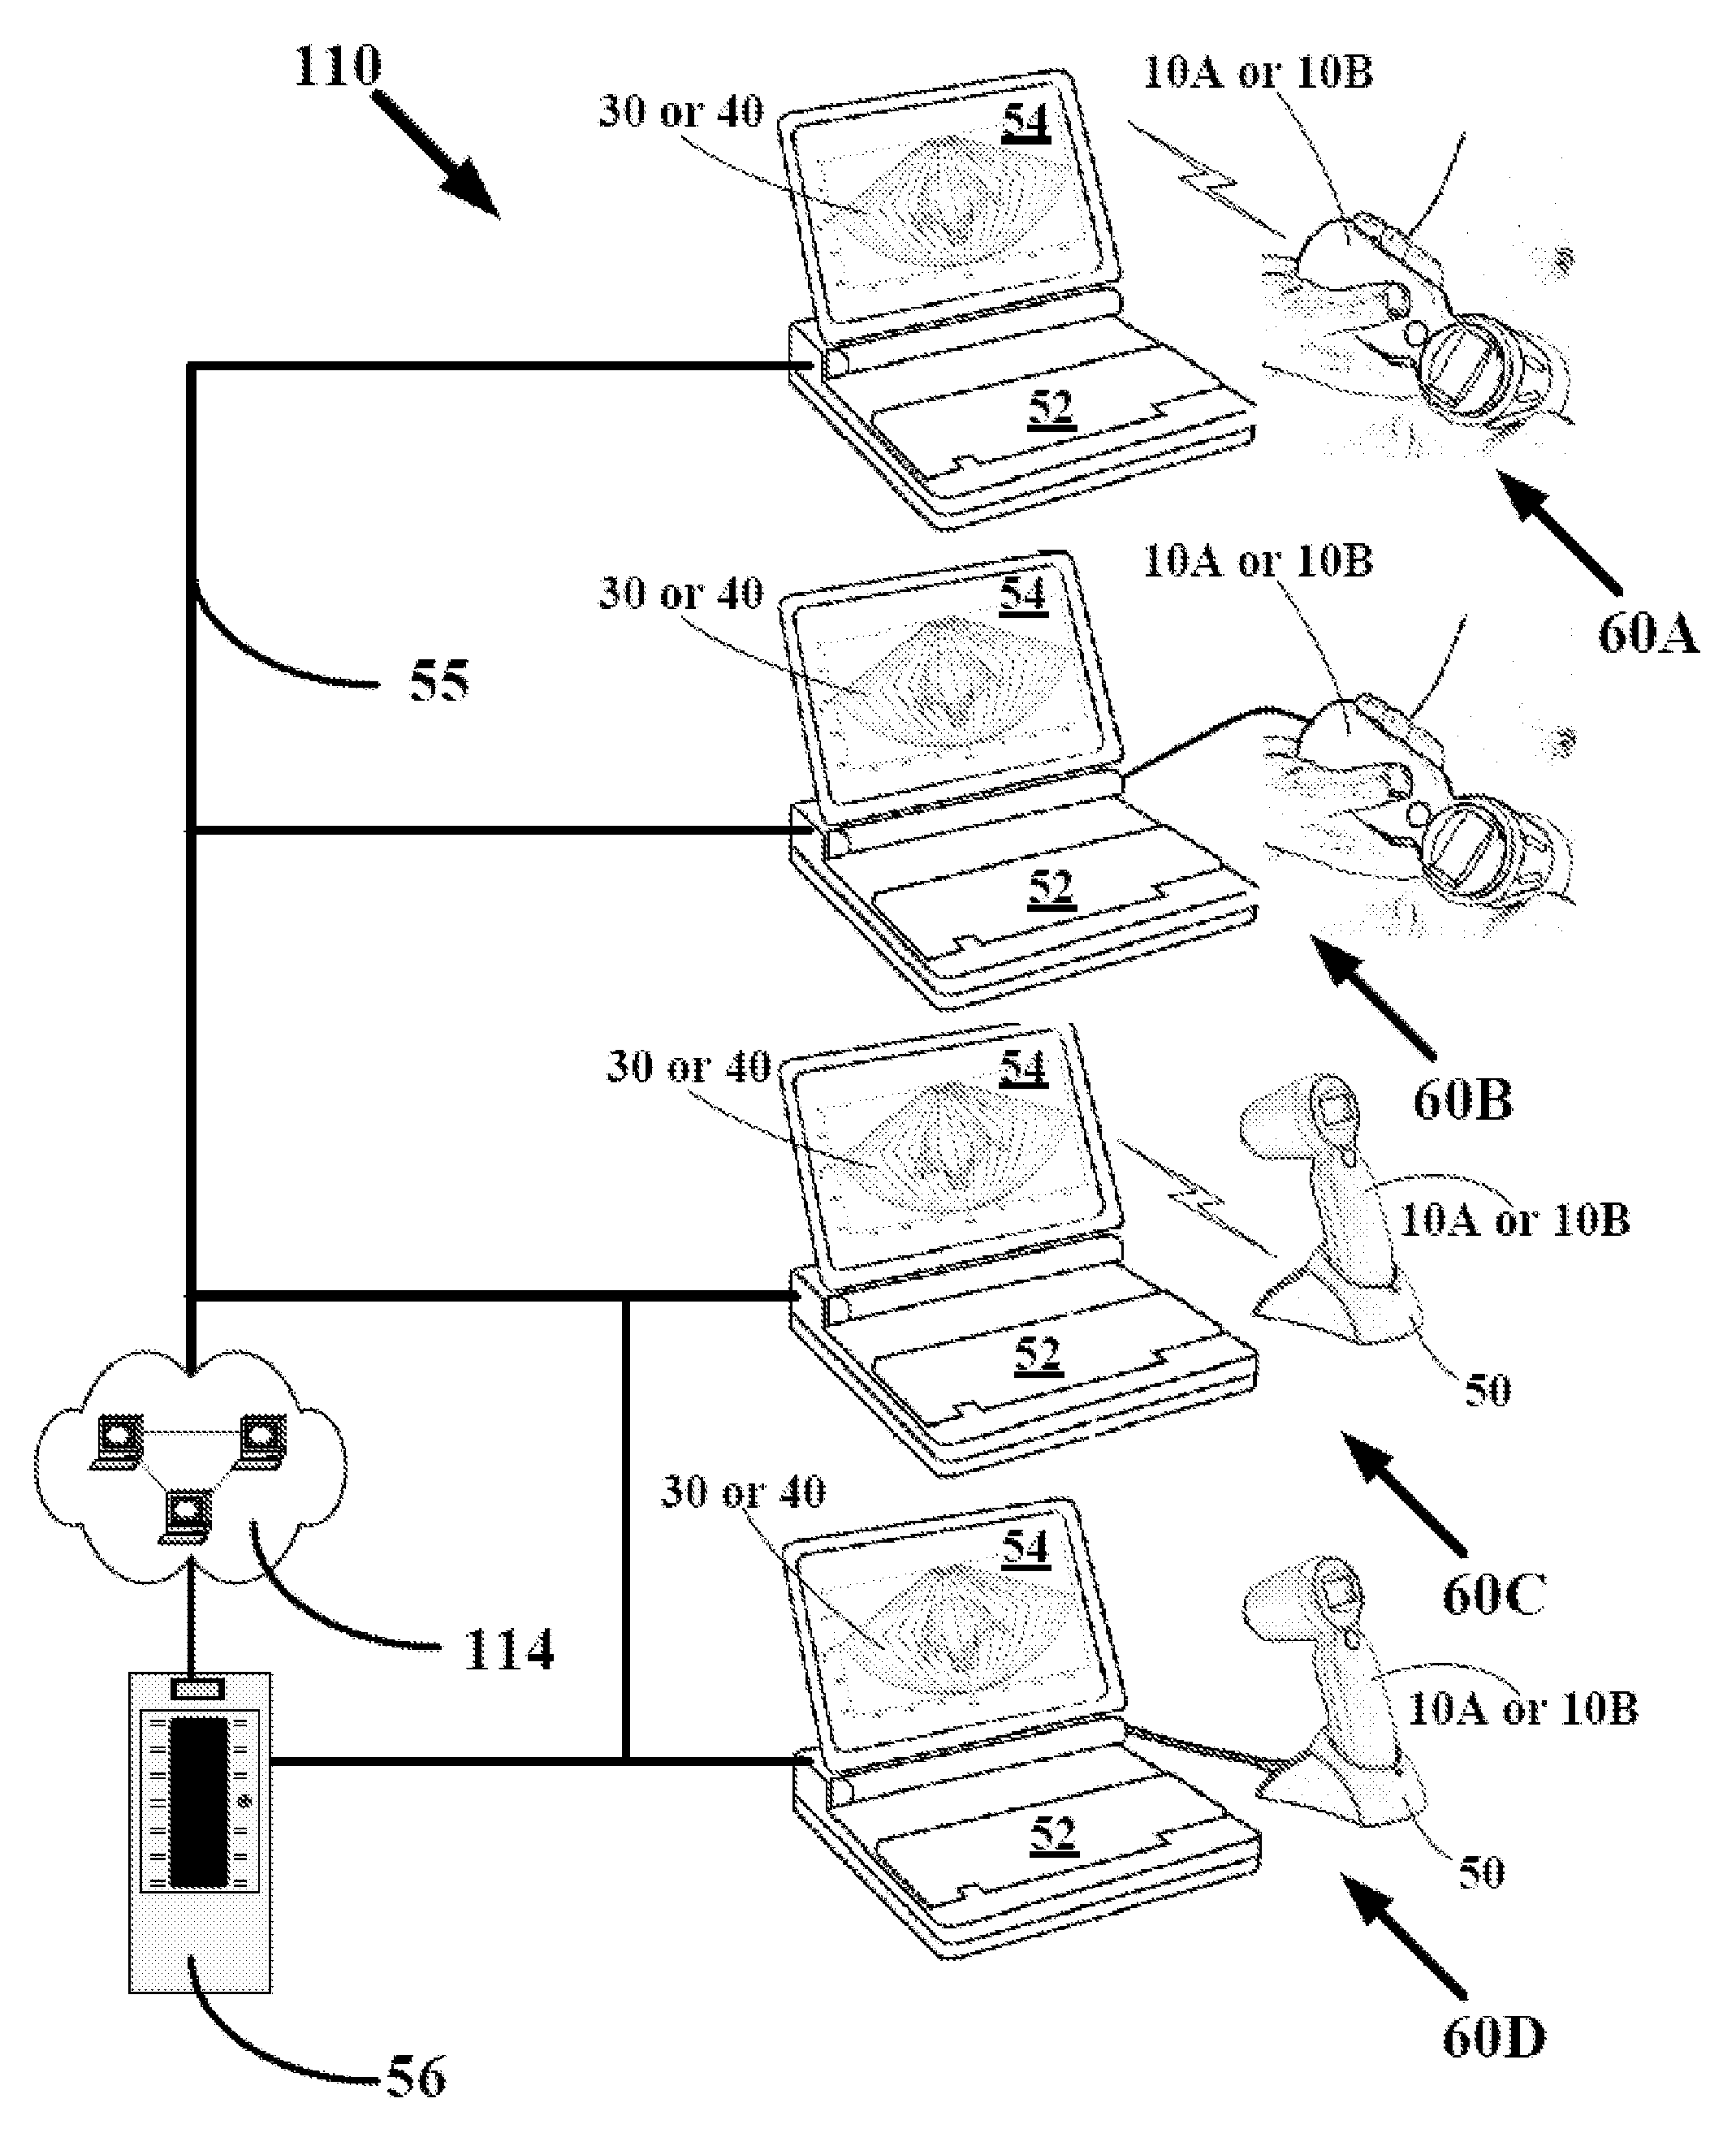 System and method to identify and measure organ wall boundaries